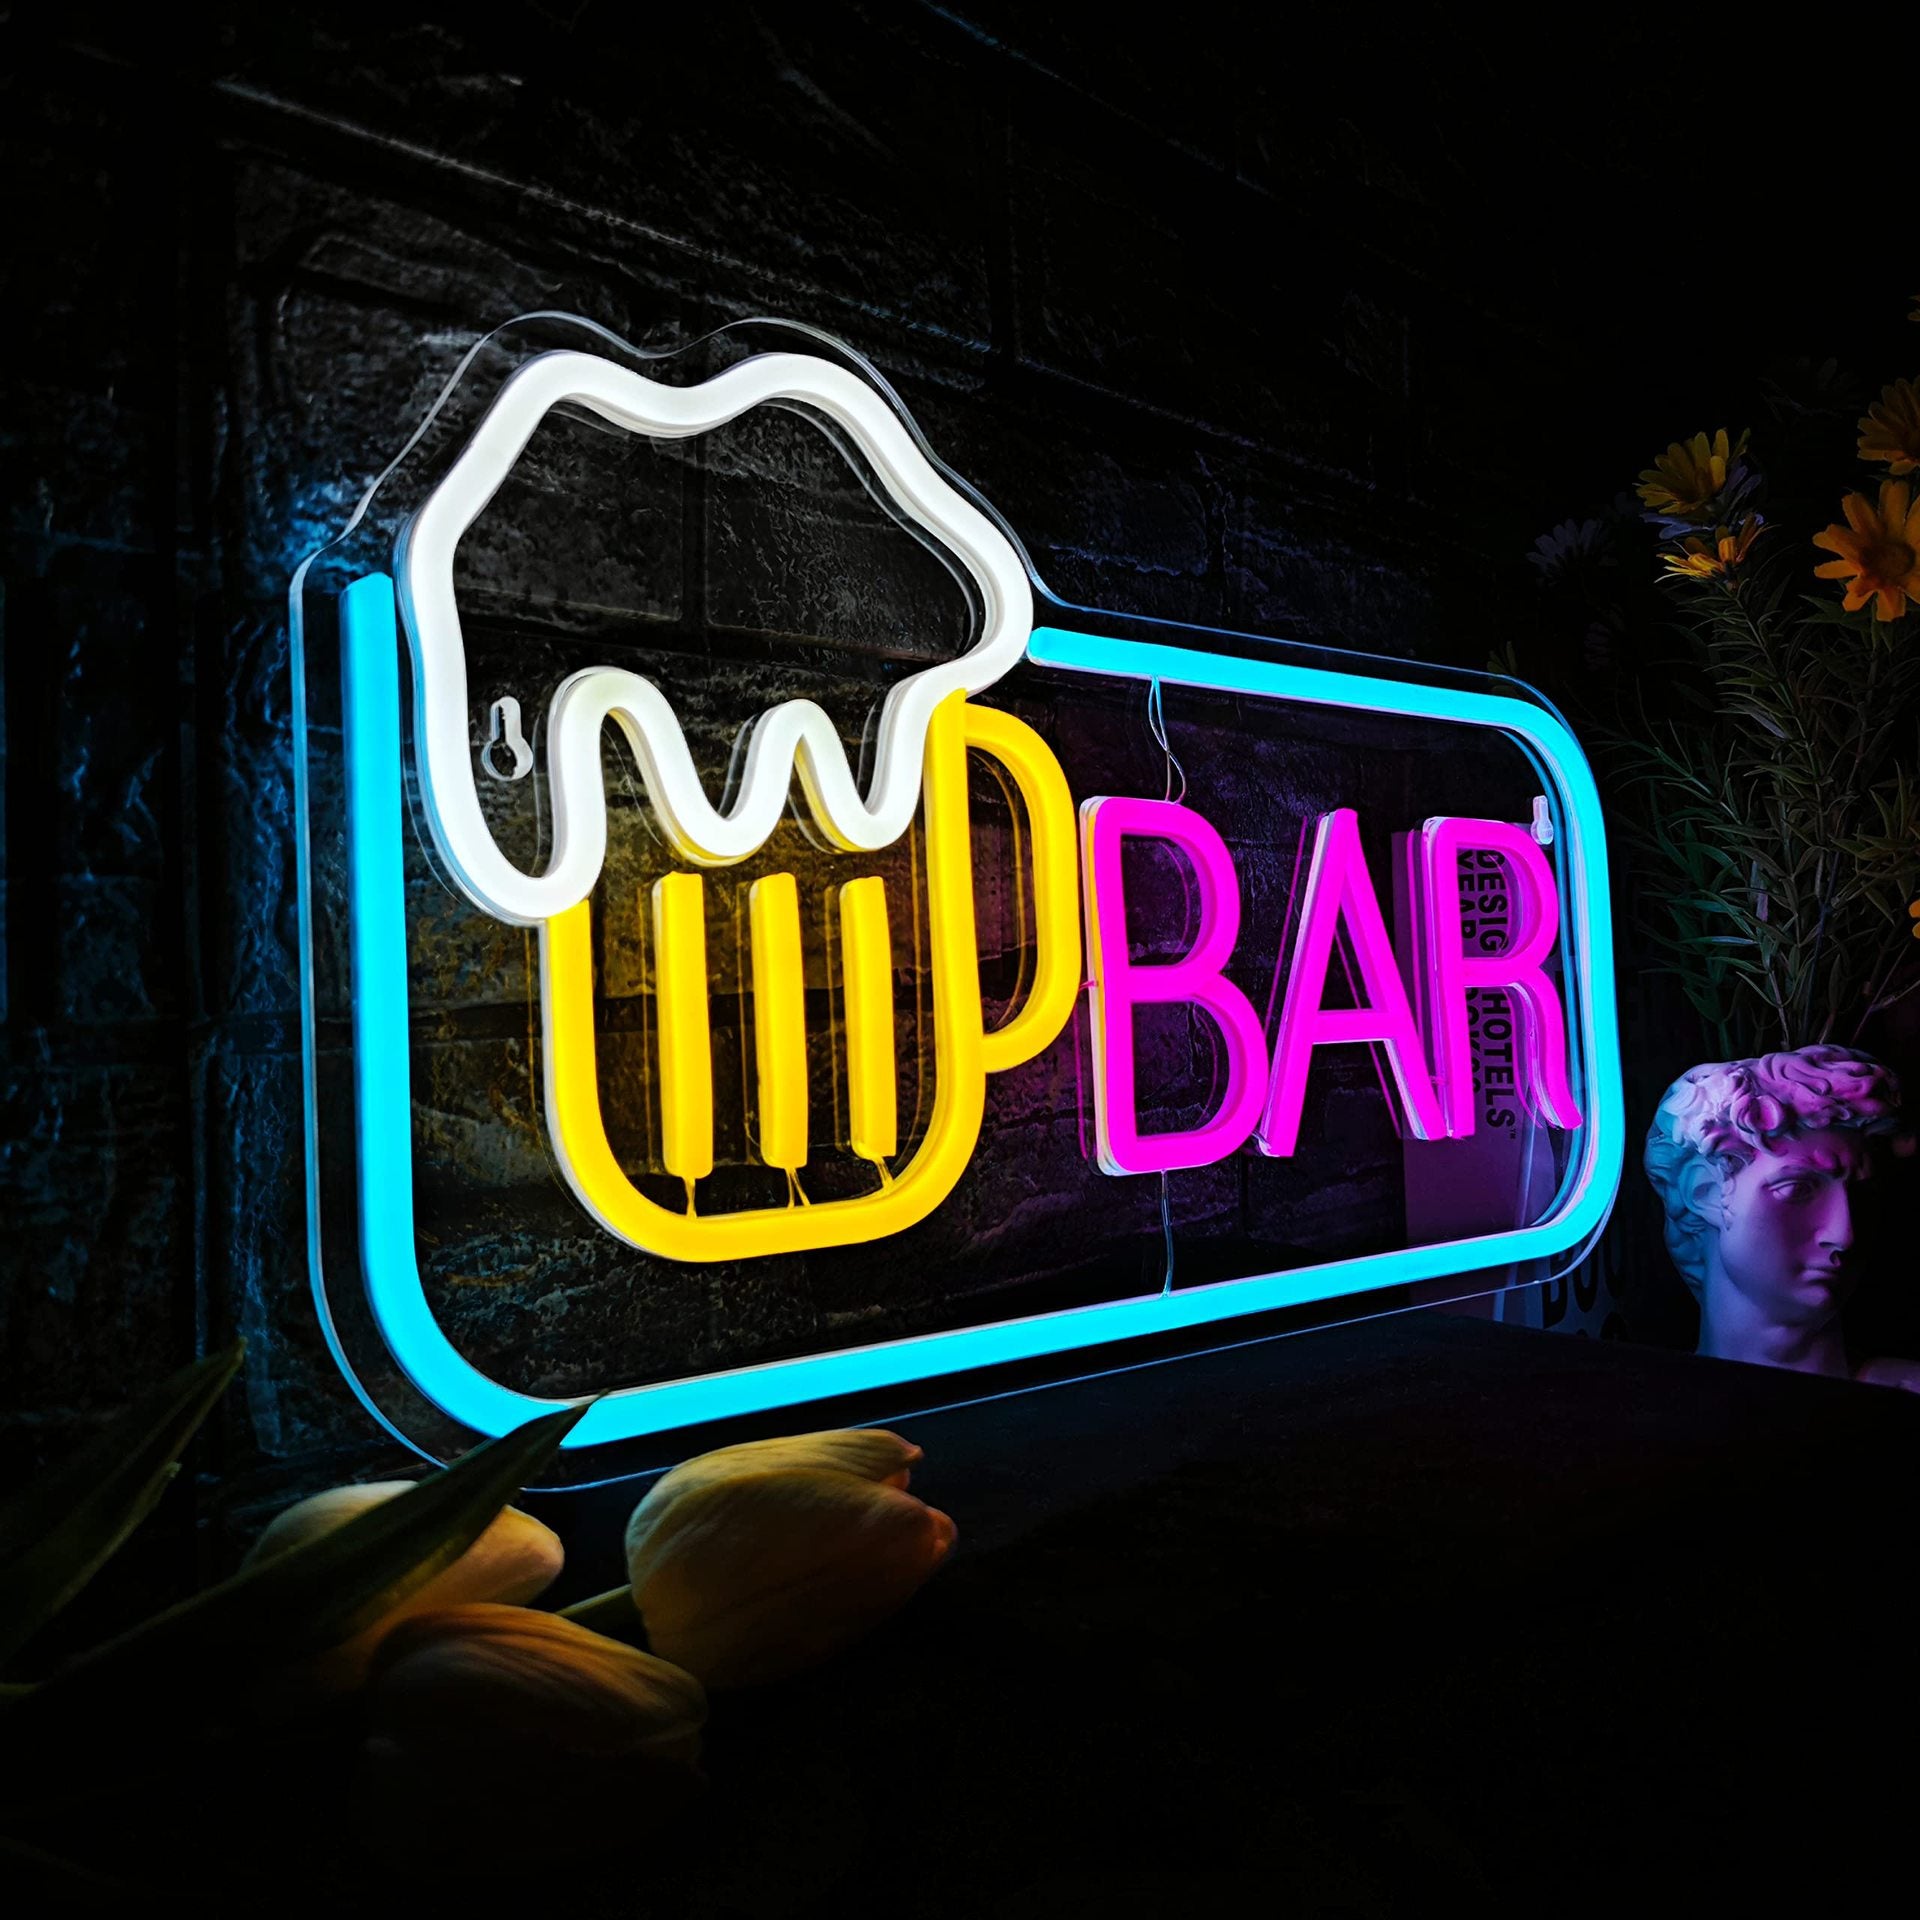 Enhance Your Bar Ambience with a High-Quality Beer Bar Neon Sign